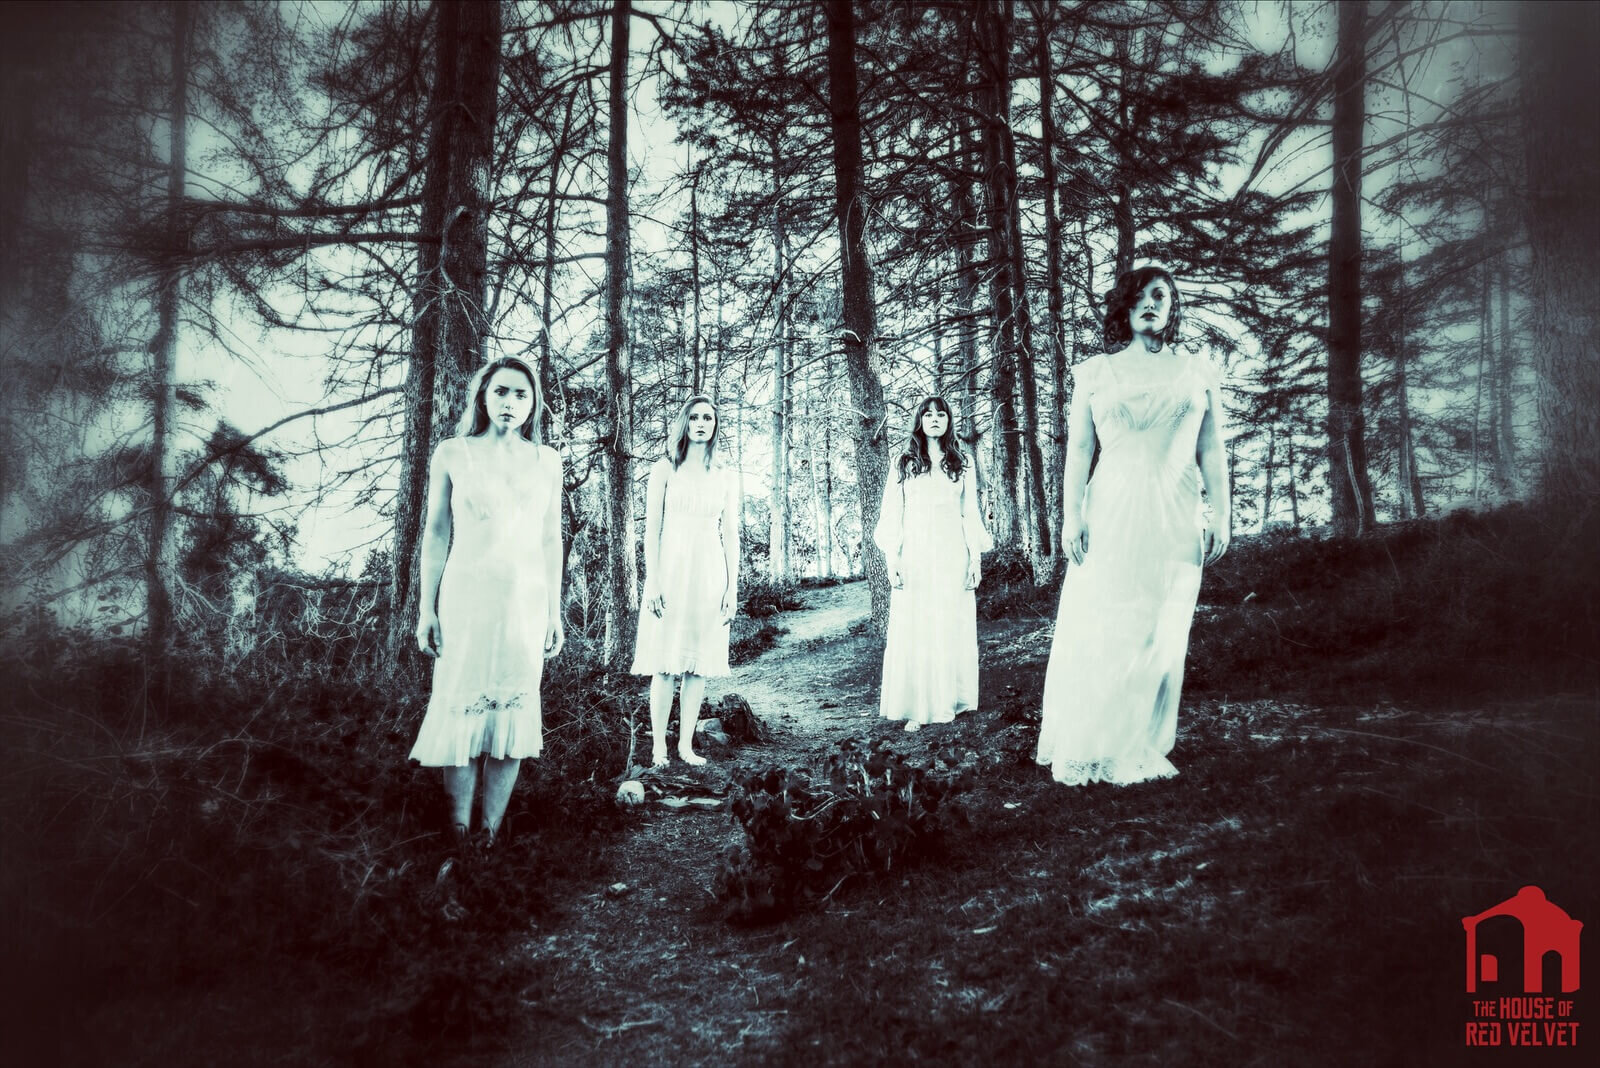 The House of Red Velvet Dark Art Photography. Witches in the forest.